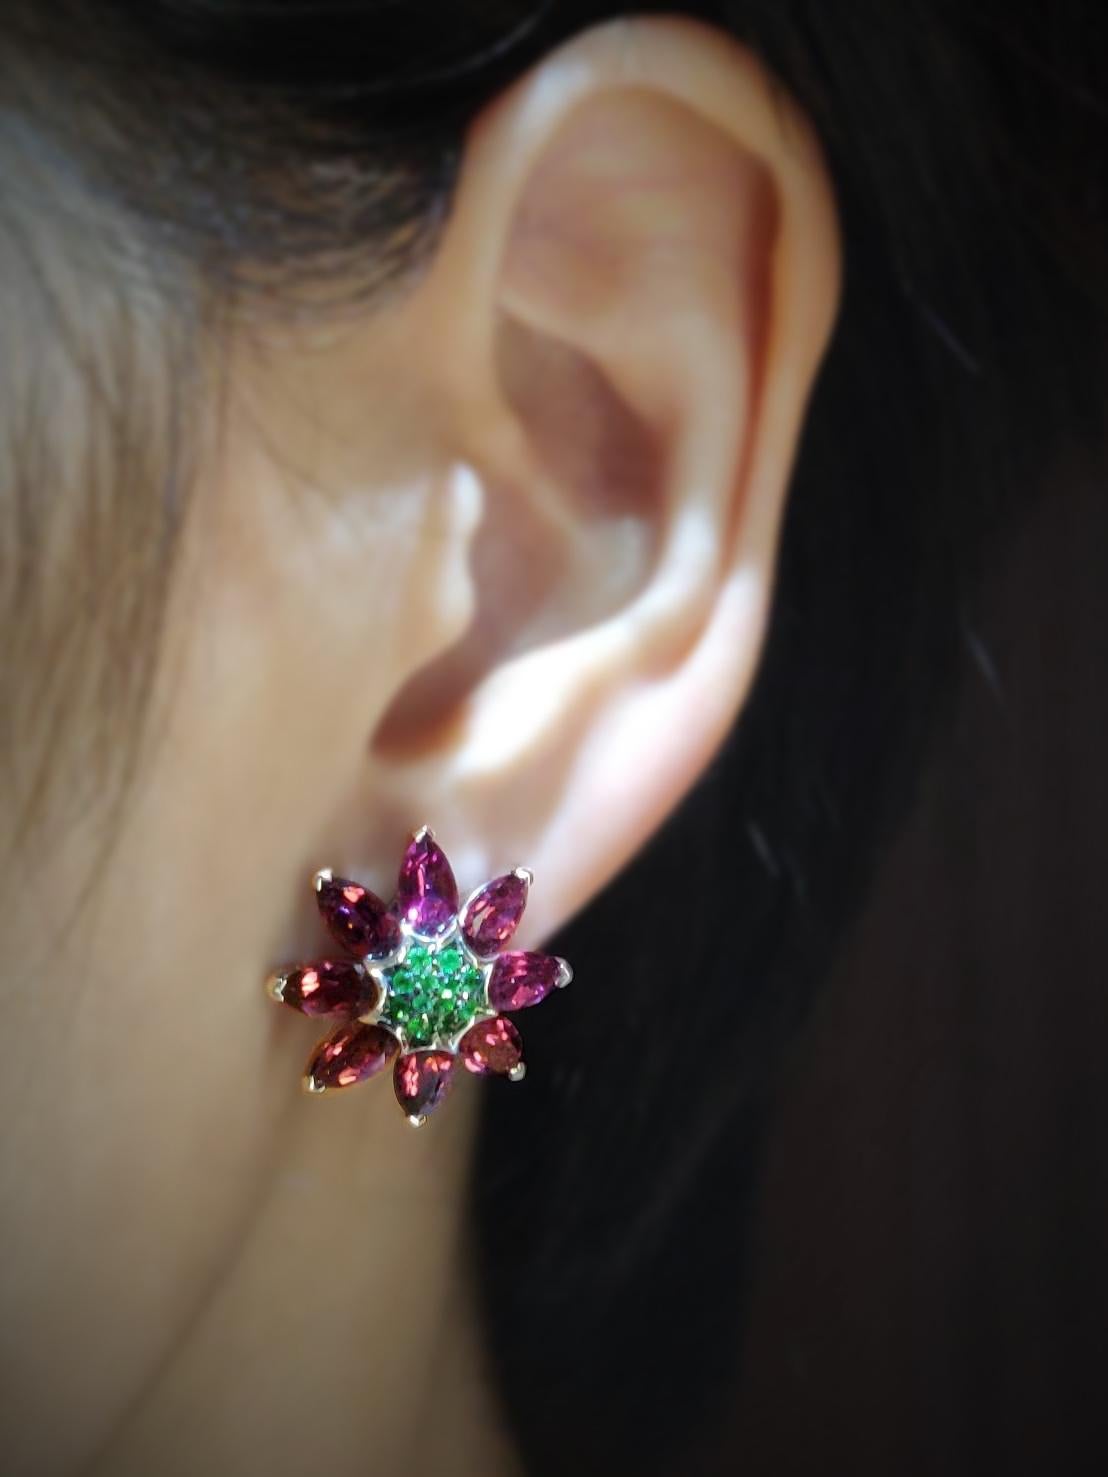 Pink Tourmaline Green Tsavorite Clematis Flower 18K White Gold Clip-On Earrings with collapsible posts for both pierced and unpierced ears

Gold: 18K White Gold, 14.484 g
Tsavorite: 0.48 ct
Pink Tourmaline: 9.92 ct